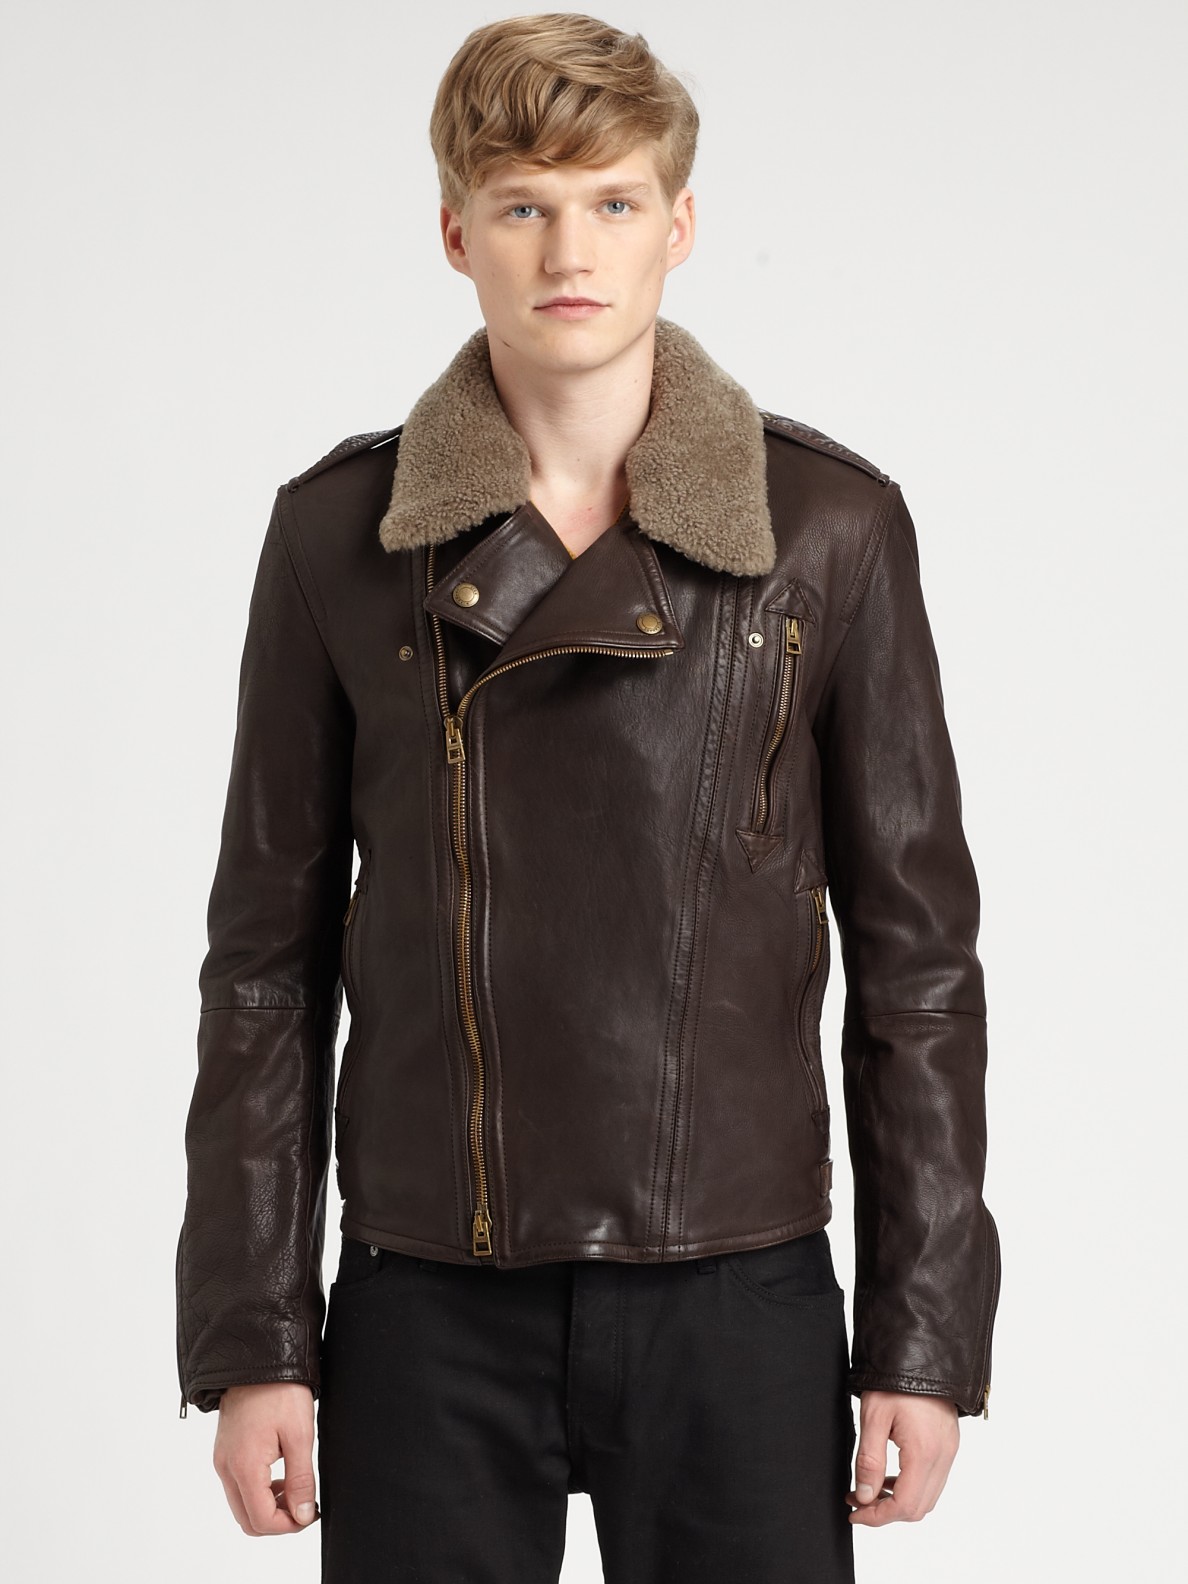 Lyst - Burberry brit Leather Jacket in Brown for Men